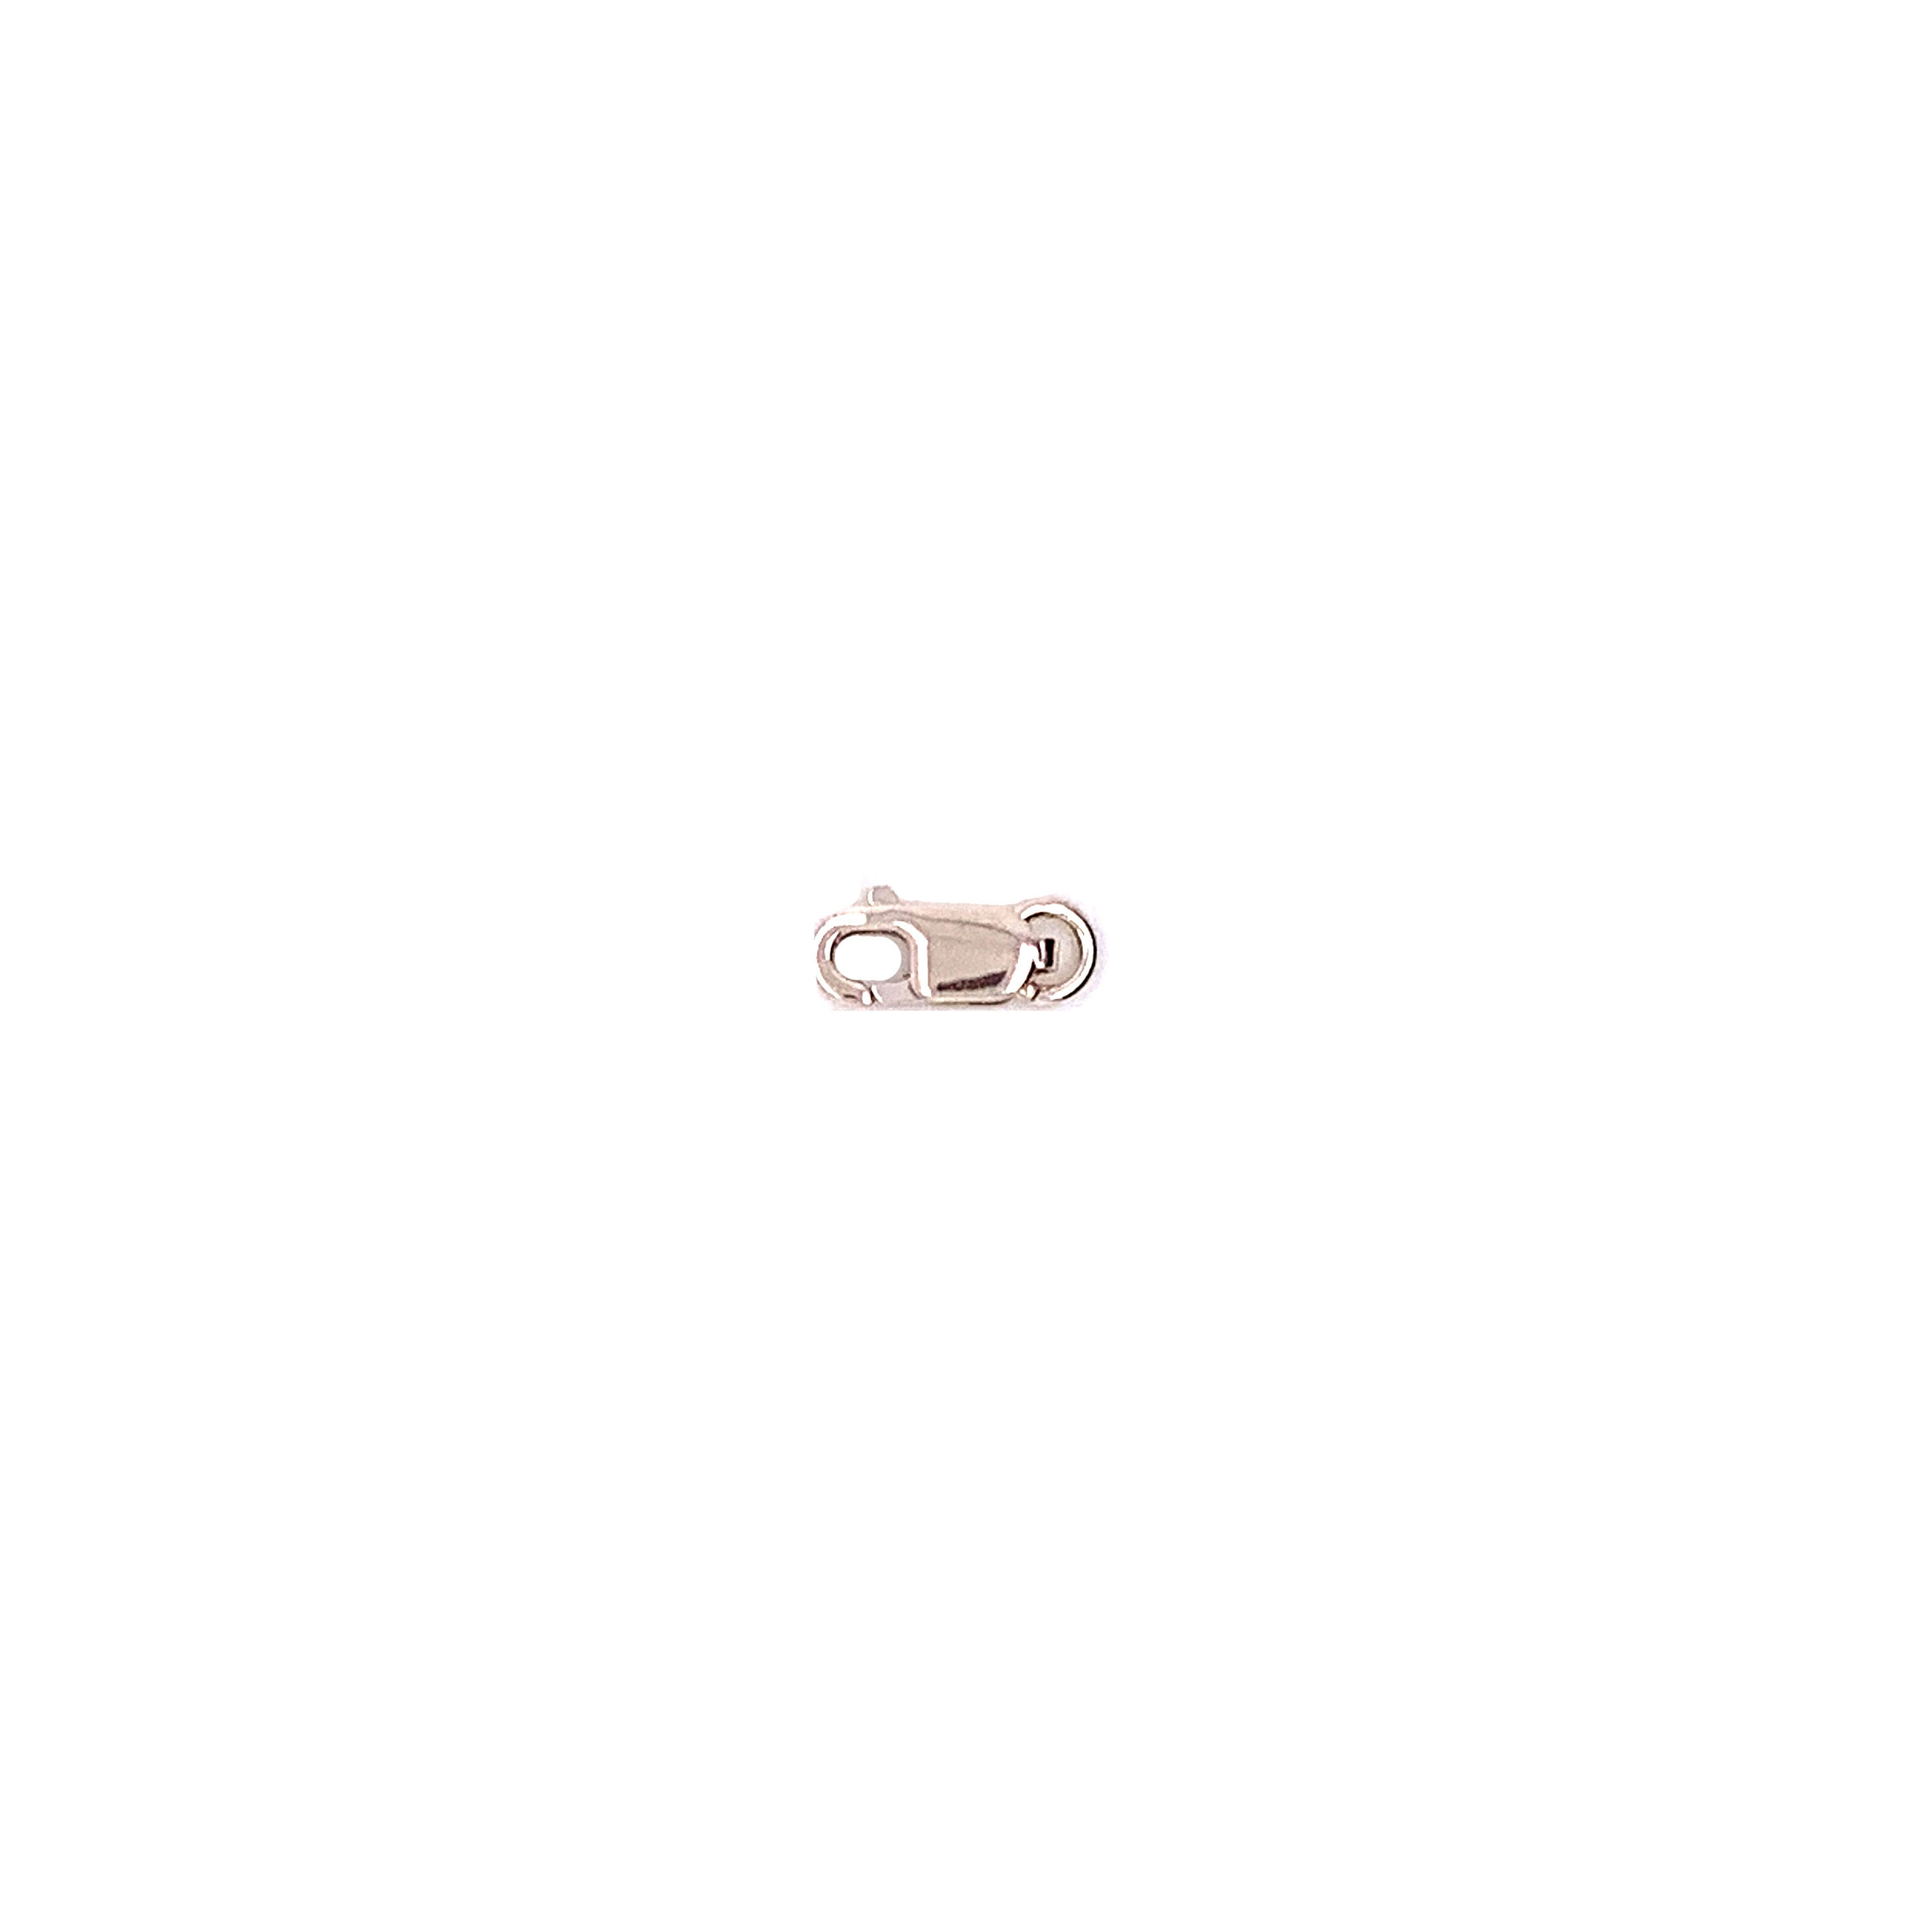 Lobster Clasp - Sterling Silver - 3.0 x 8.0mm